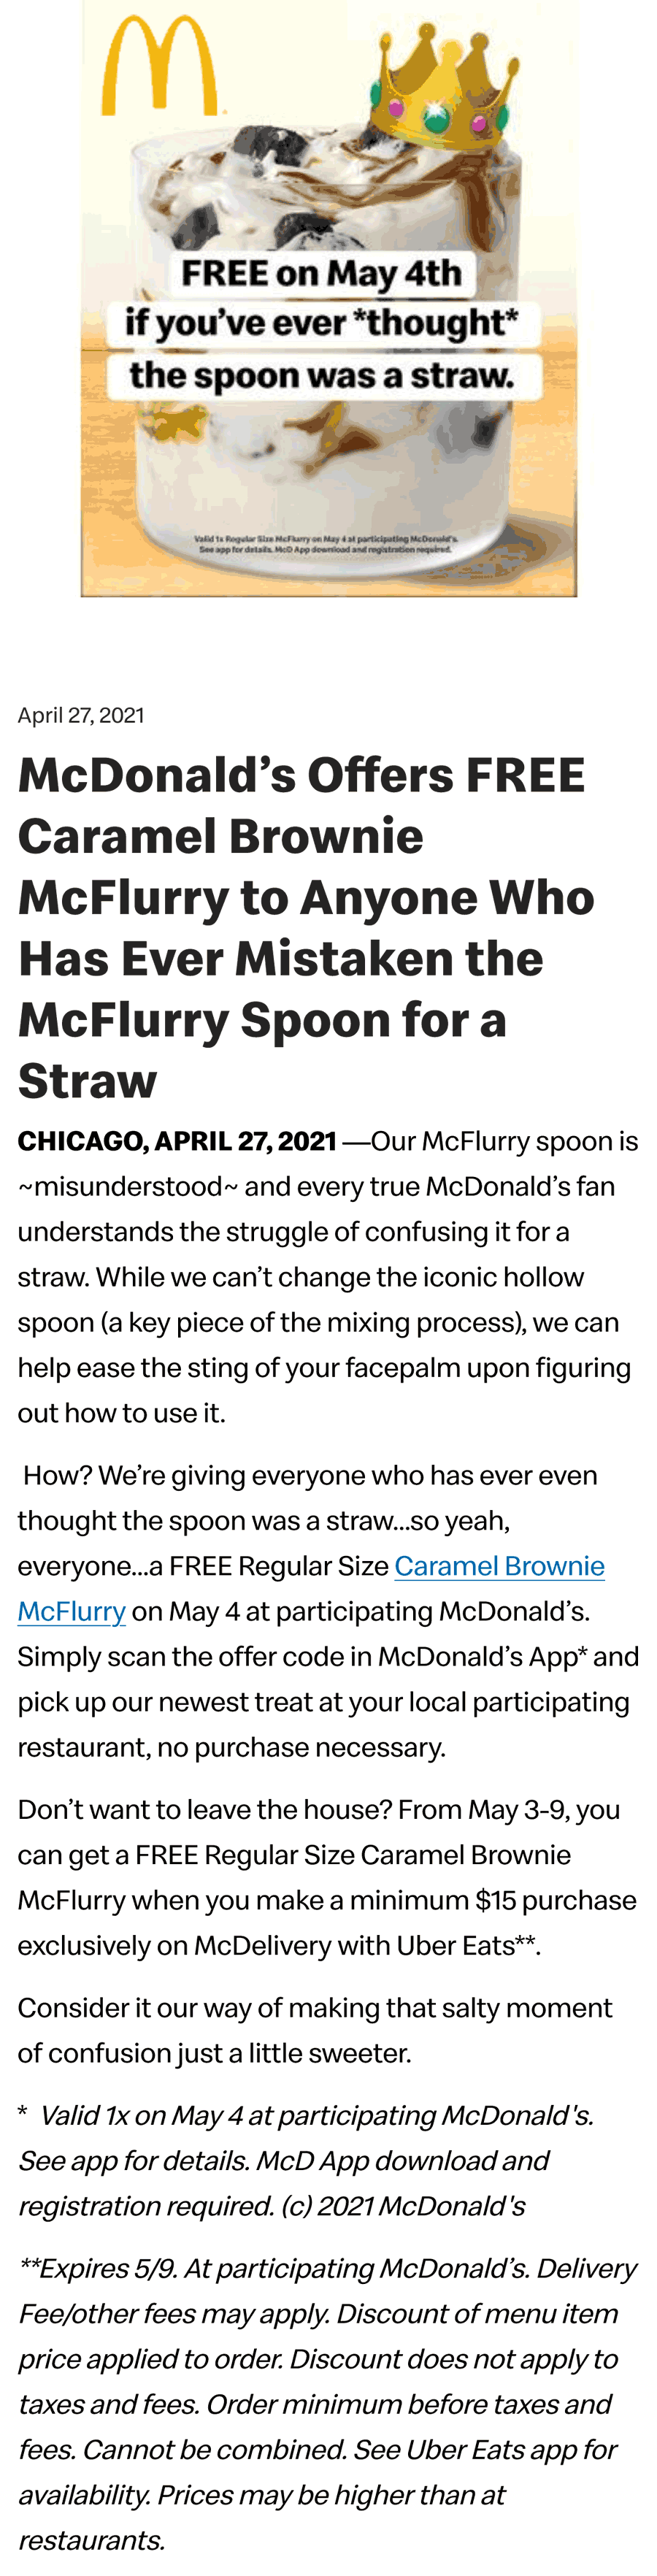 McDonalds restaurants Coupon  Free caramel brownie McFlurry Tuesday at McDonalds restaurants, also all week the 3-9th via delivery #mcdonalds 